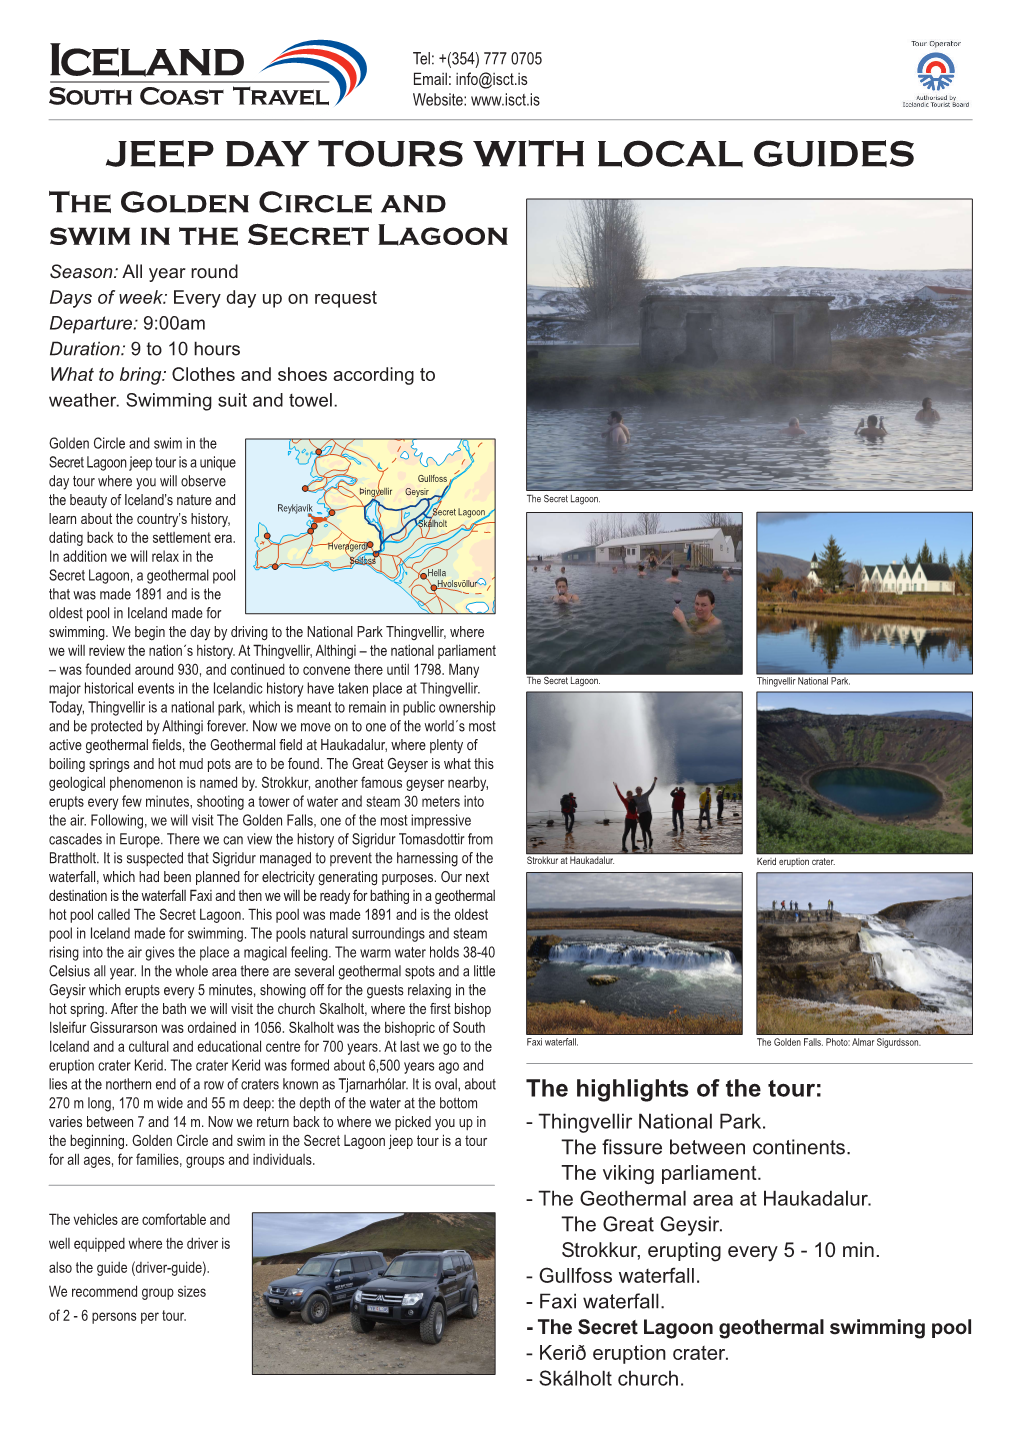 Golden Circle and Swim in the Secret Lagoon Jeep Tour Details in PDF